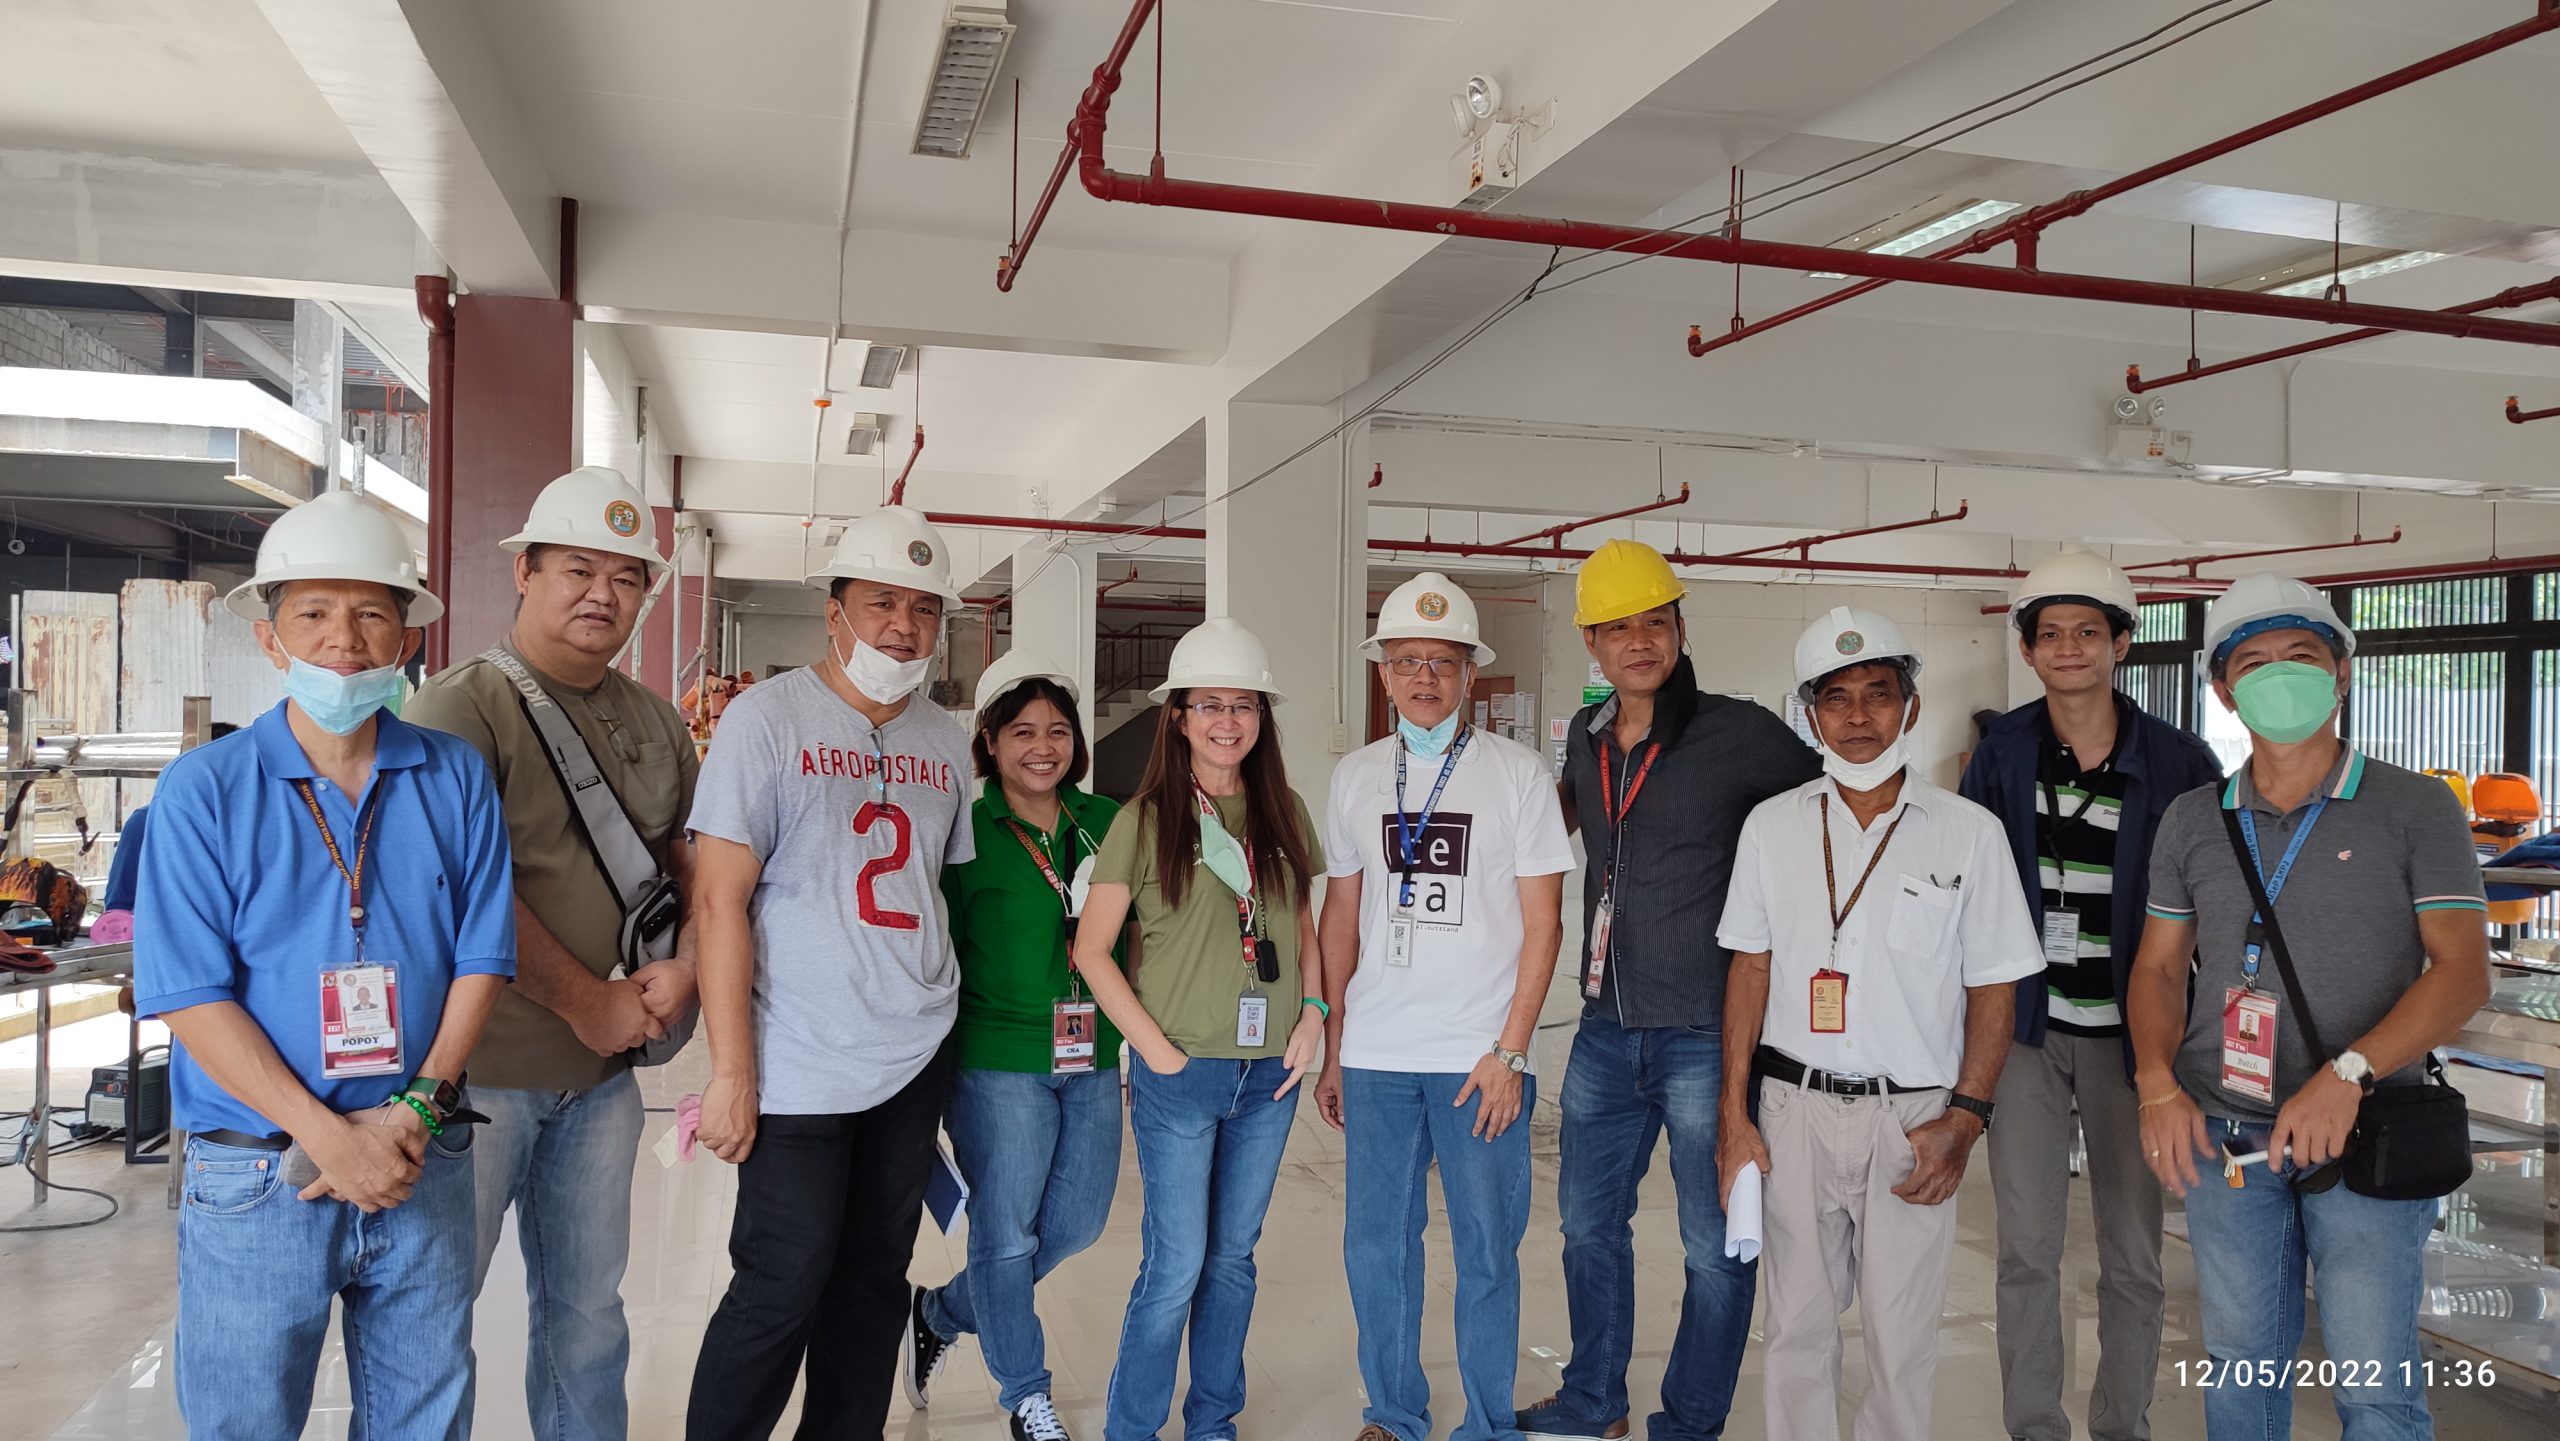 INFRASTRUCTURE COMMITTEE INSPECTED THE ON-GOING CONSTRUCTION OF THE T.L.E. BUILDING ON MAY 12, 2022